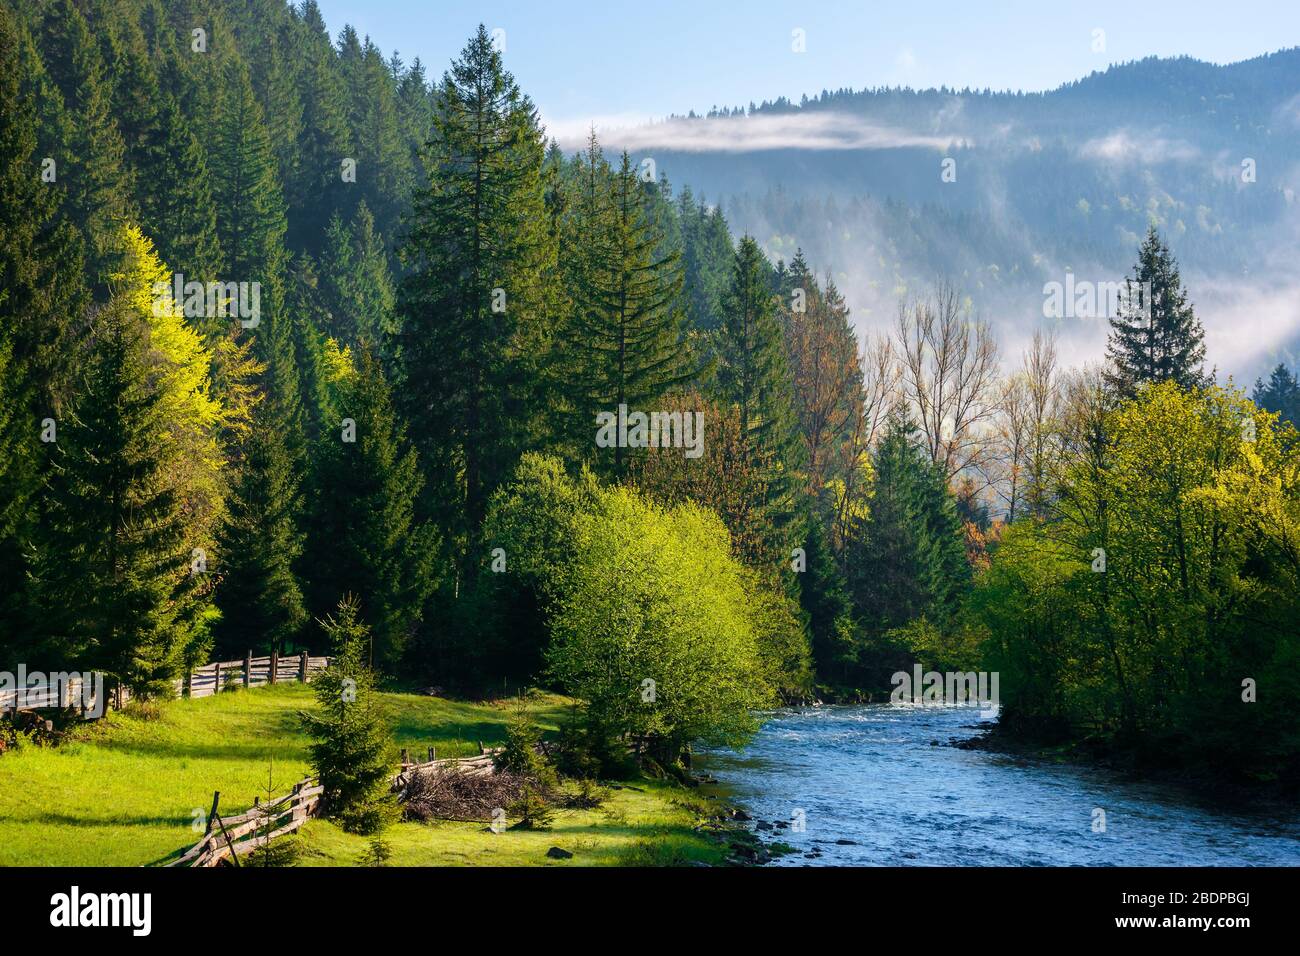 mountain river on a misty sunrise. gorgeous landscape with fog rolling above the trees in fresh green foliage on the shore in the distance. beautiful Stock Photo